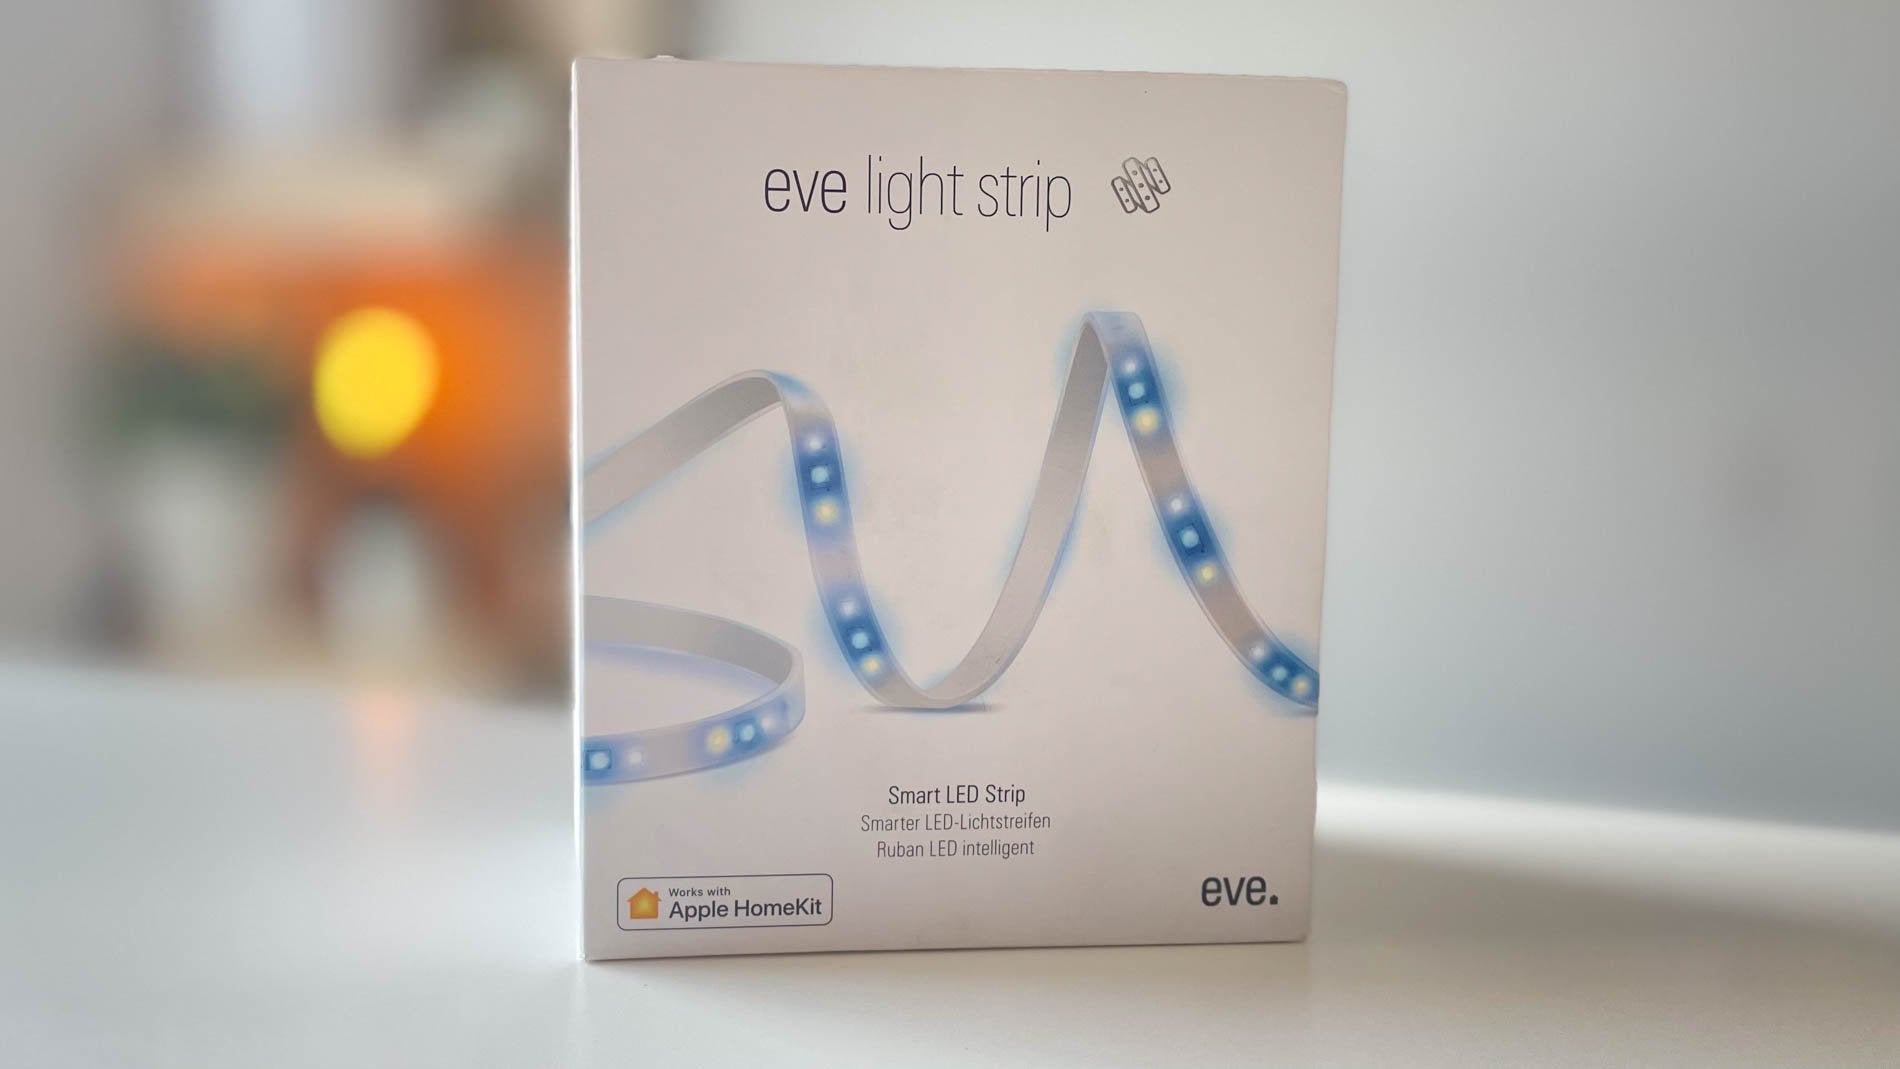 Eve launches adaptive lighting on her smart light strip